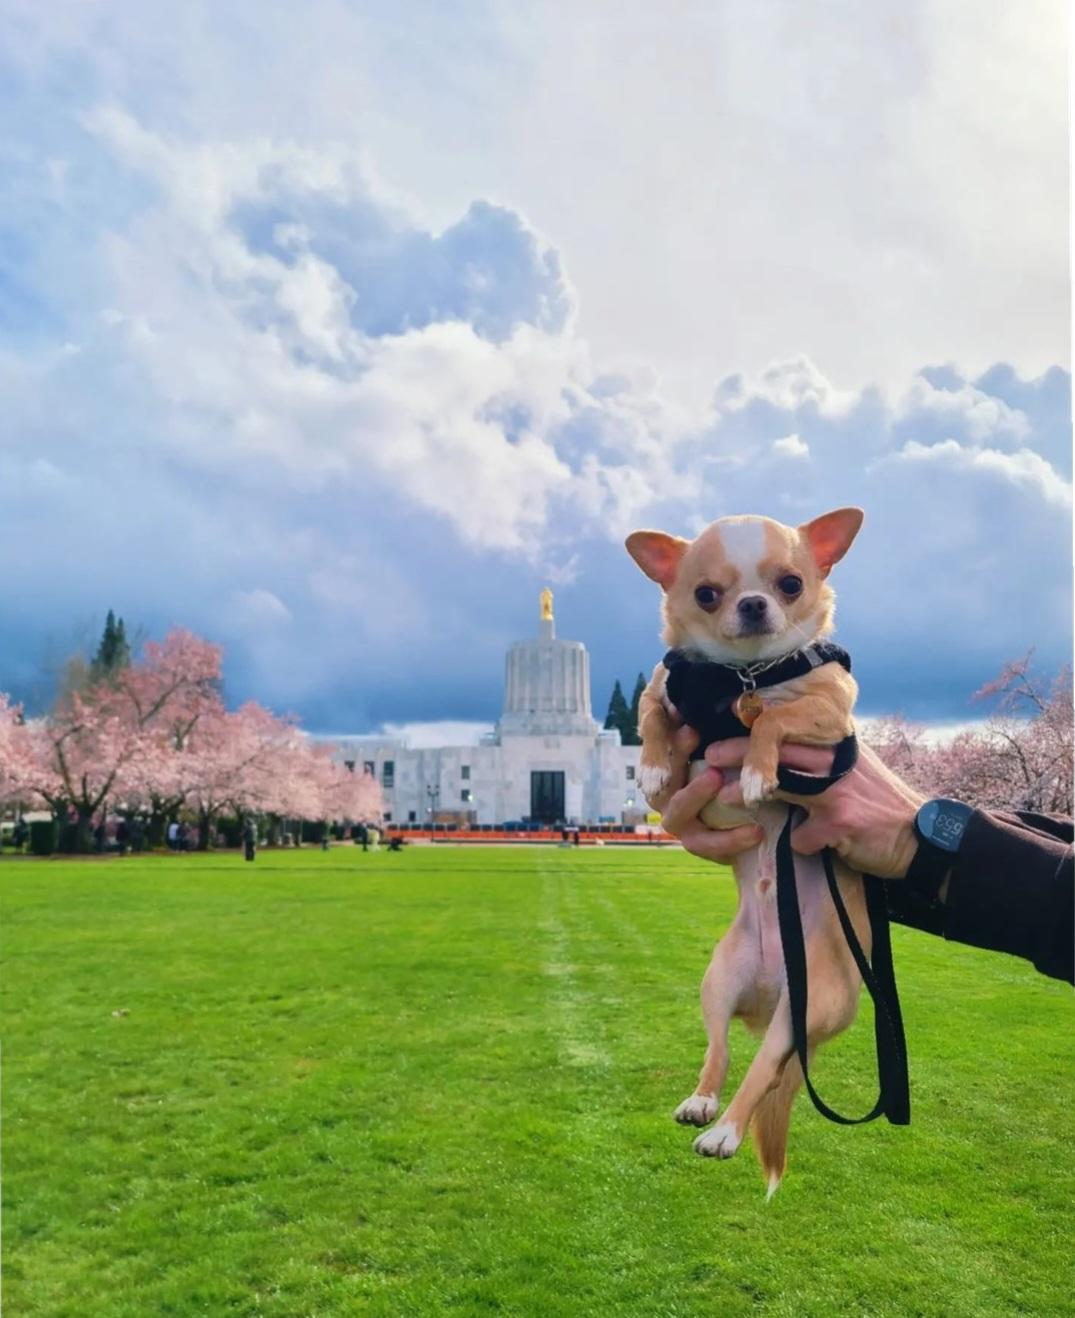 Peter, small OHS staff dog, being held up in front of the capitol building